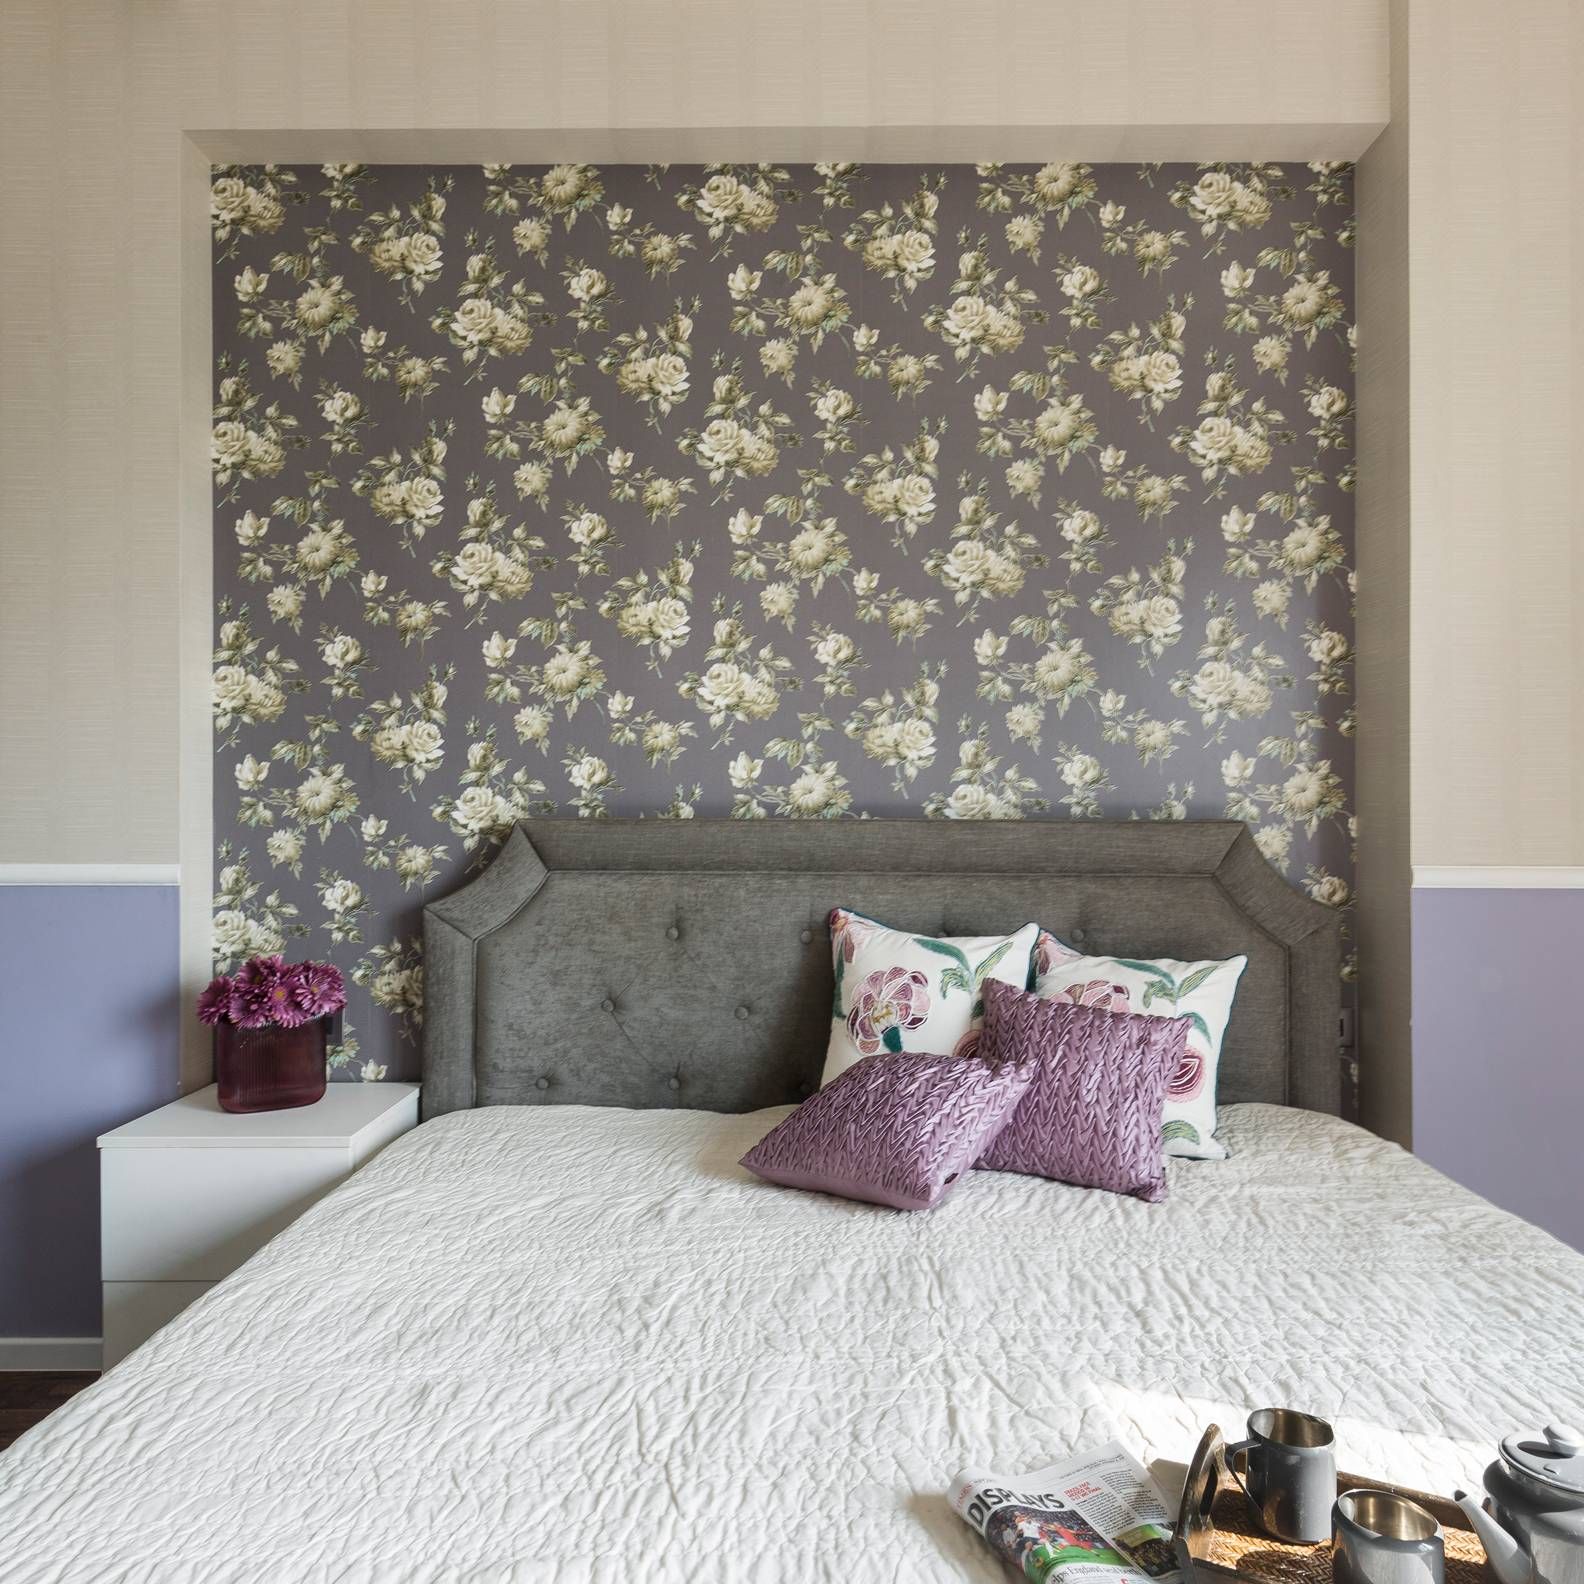 Contemporary Grey Bedroom Wallpaper Design With Damask Pattern